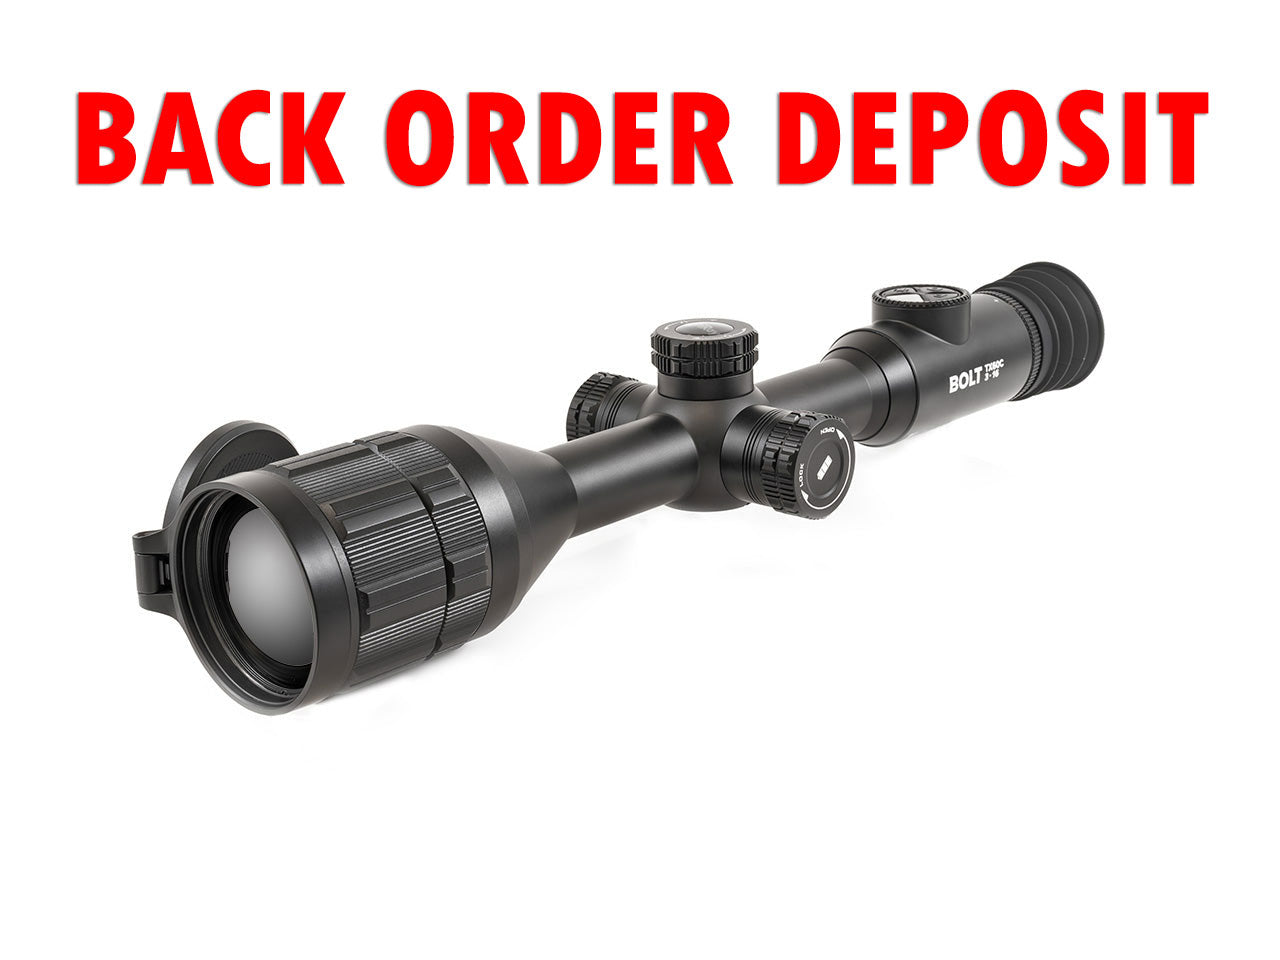 BACK ORDER - Infiray Outdoor Bolt TX60C 1024 HD 3-16x Thermal Rifle Scope